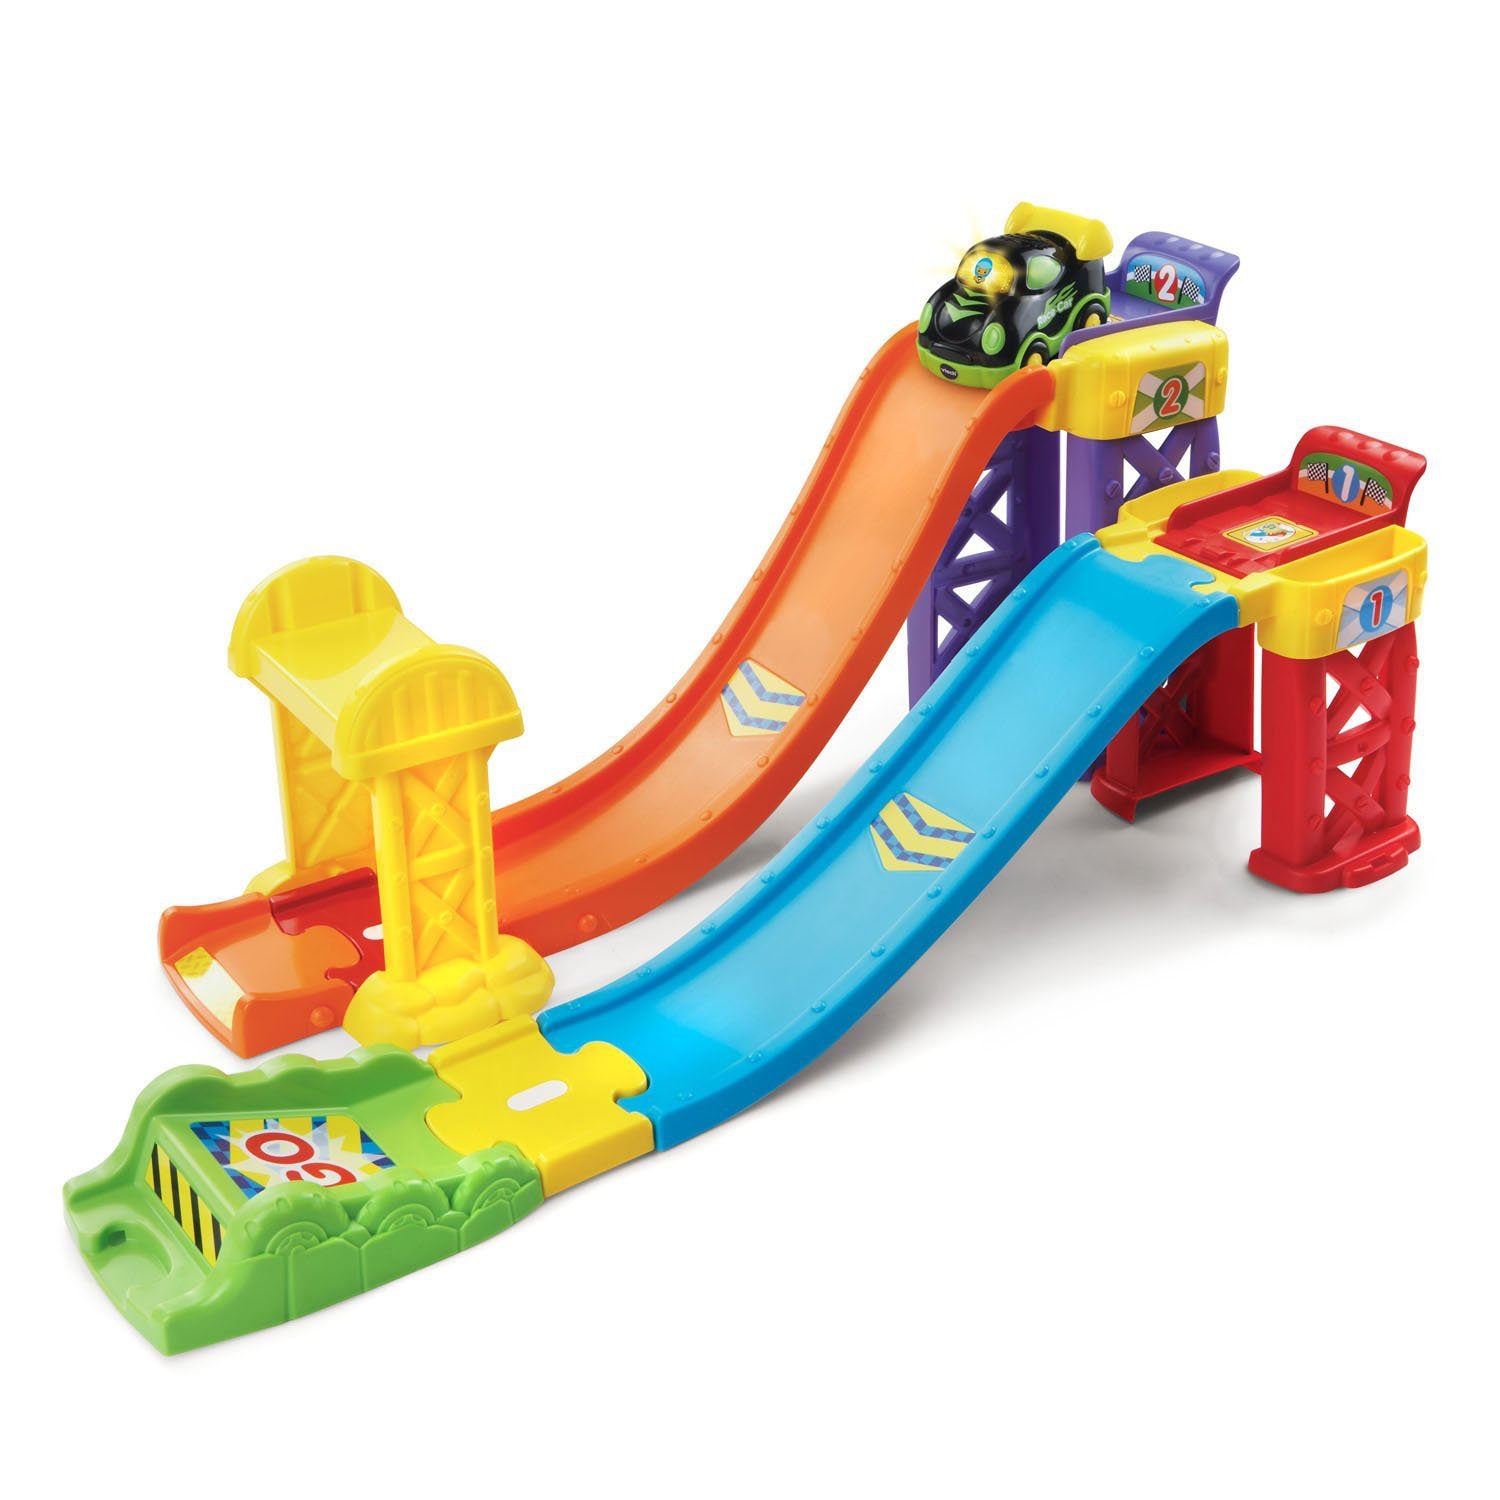 3-in-1 Launch and Play Raceway